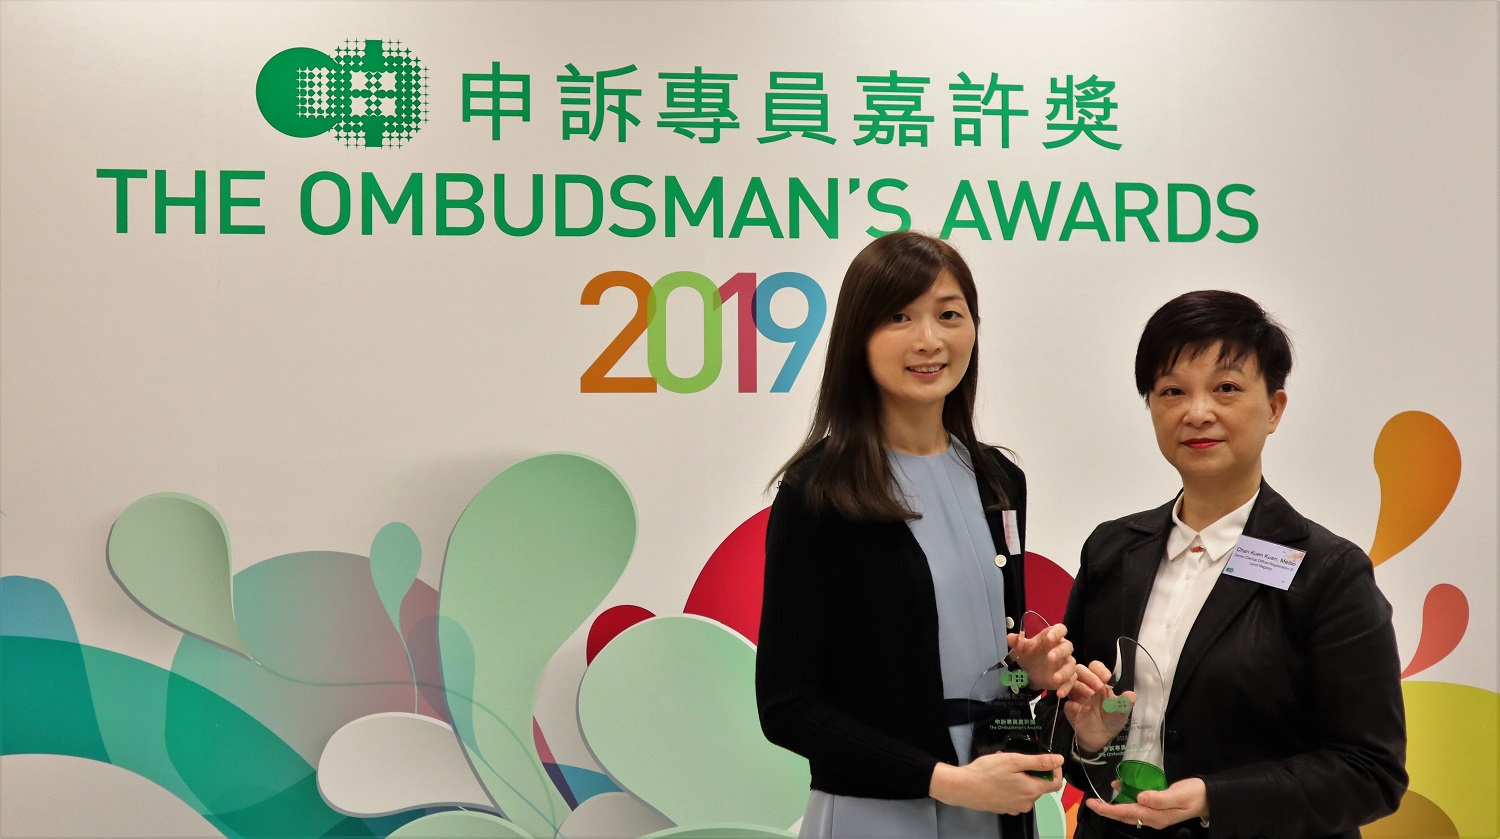 The Ombudsman’s Awards 2019 for Officers of Public Organisations_Image 2